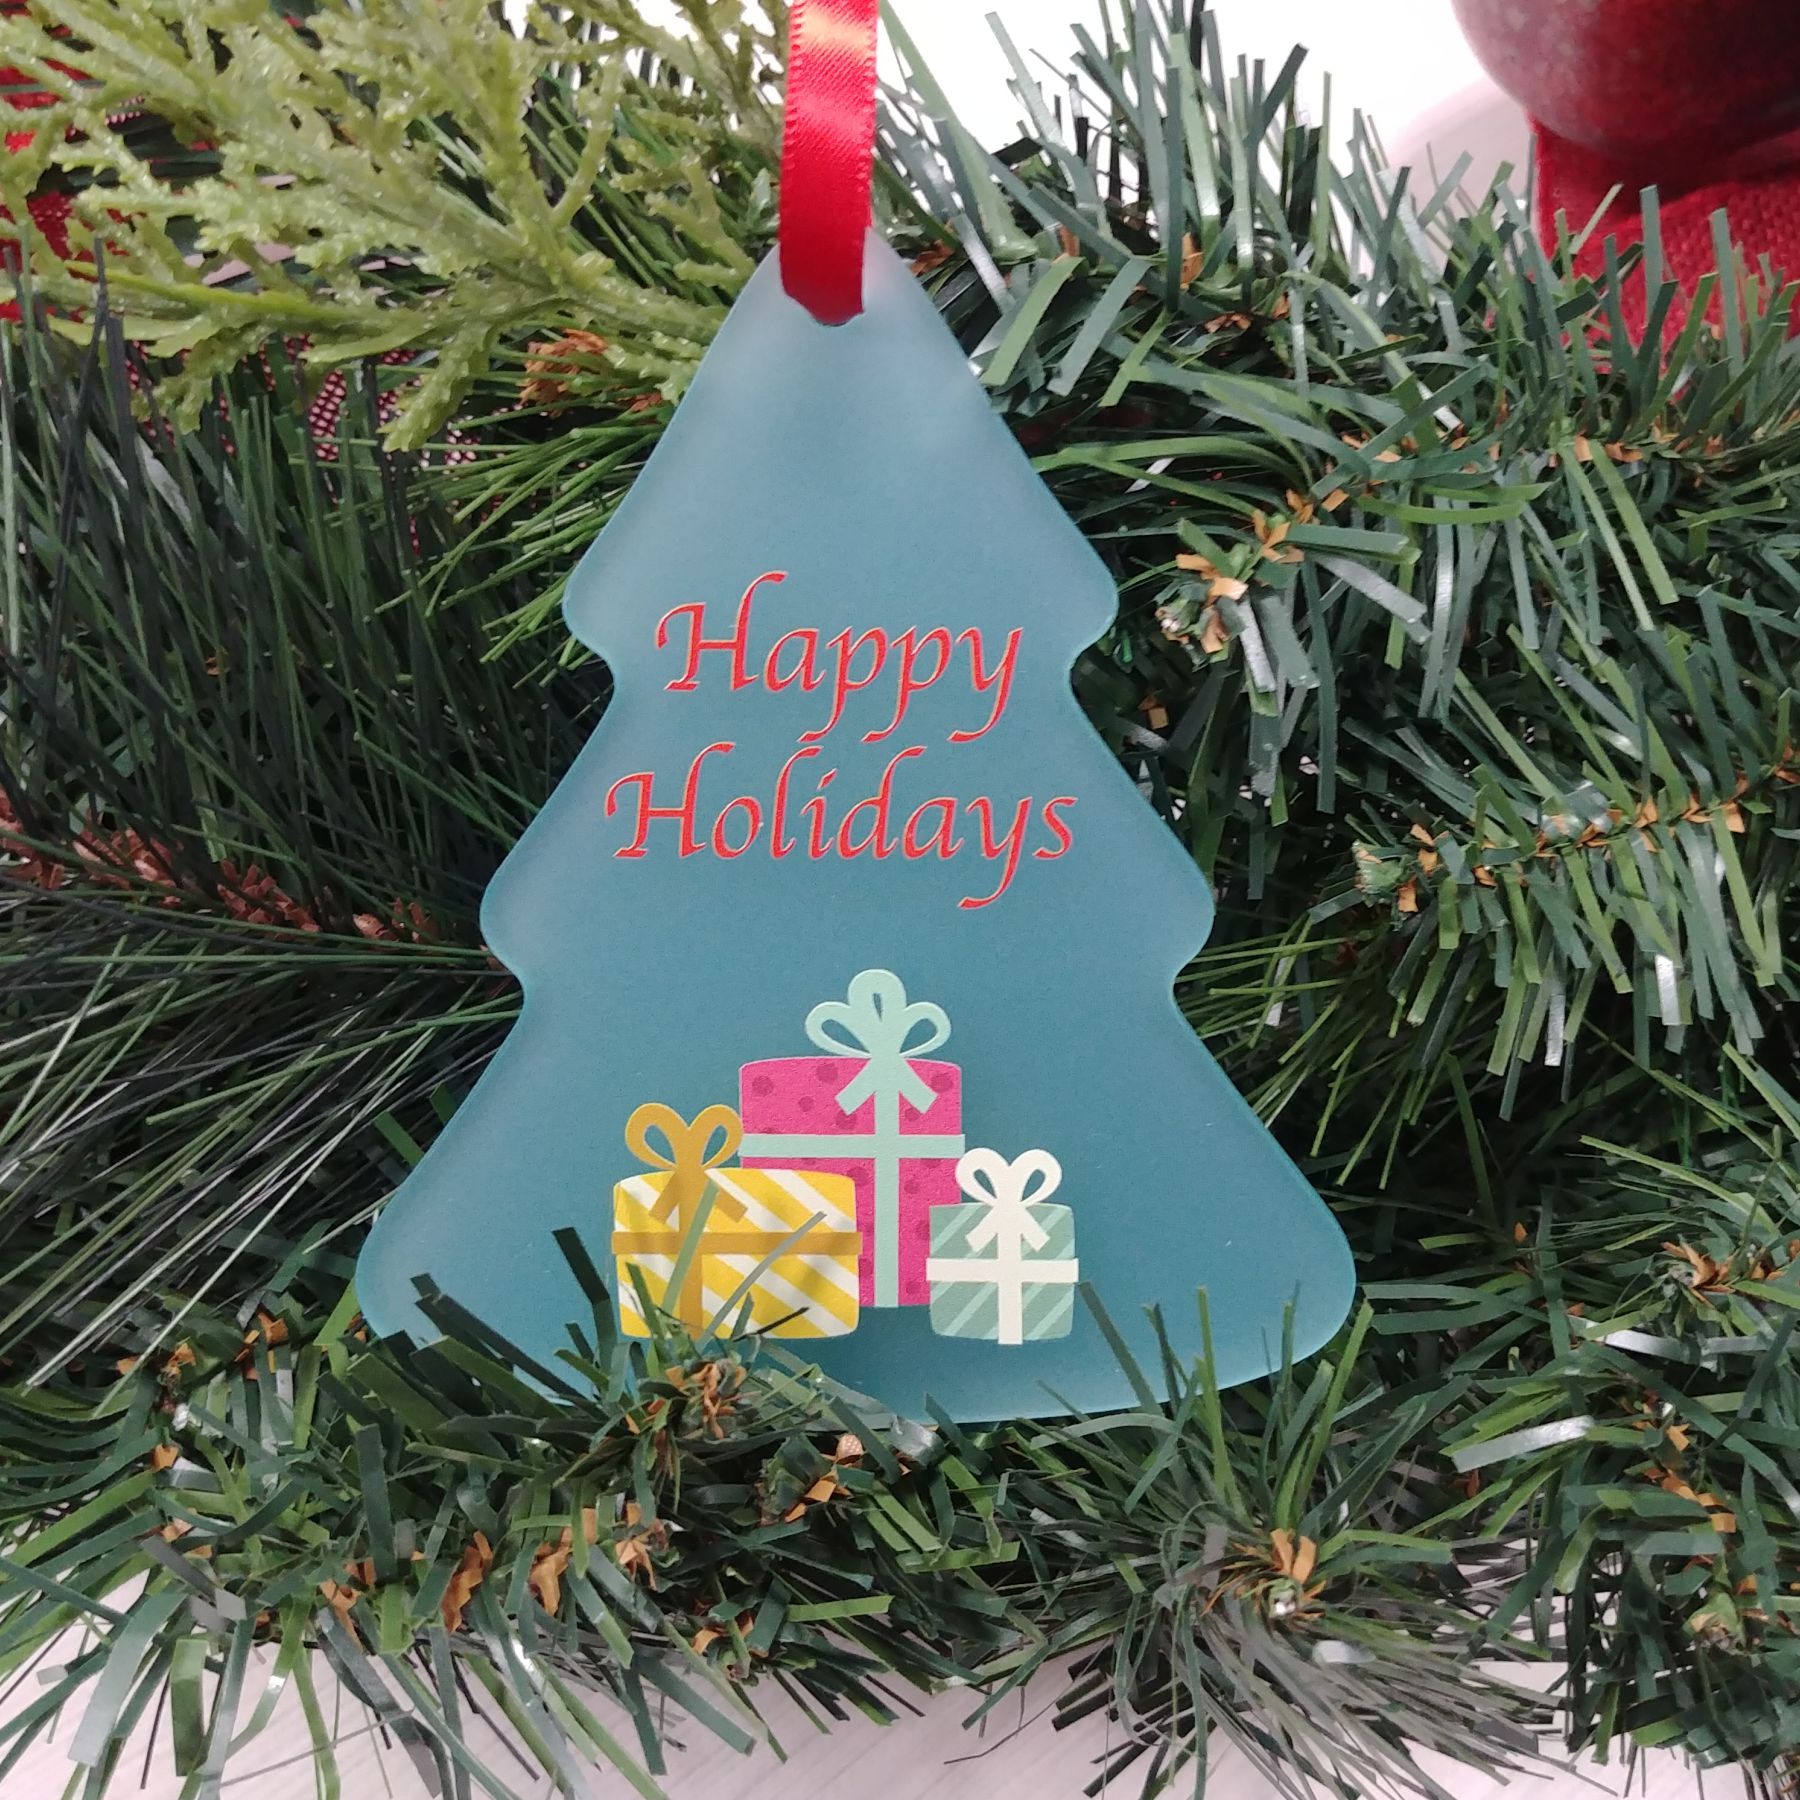 Personalized Acrylic Ornament - Christmas Gift For Family- Upload